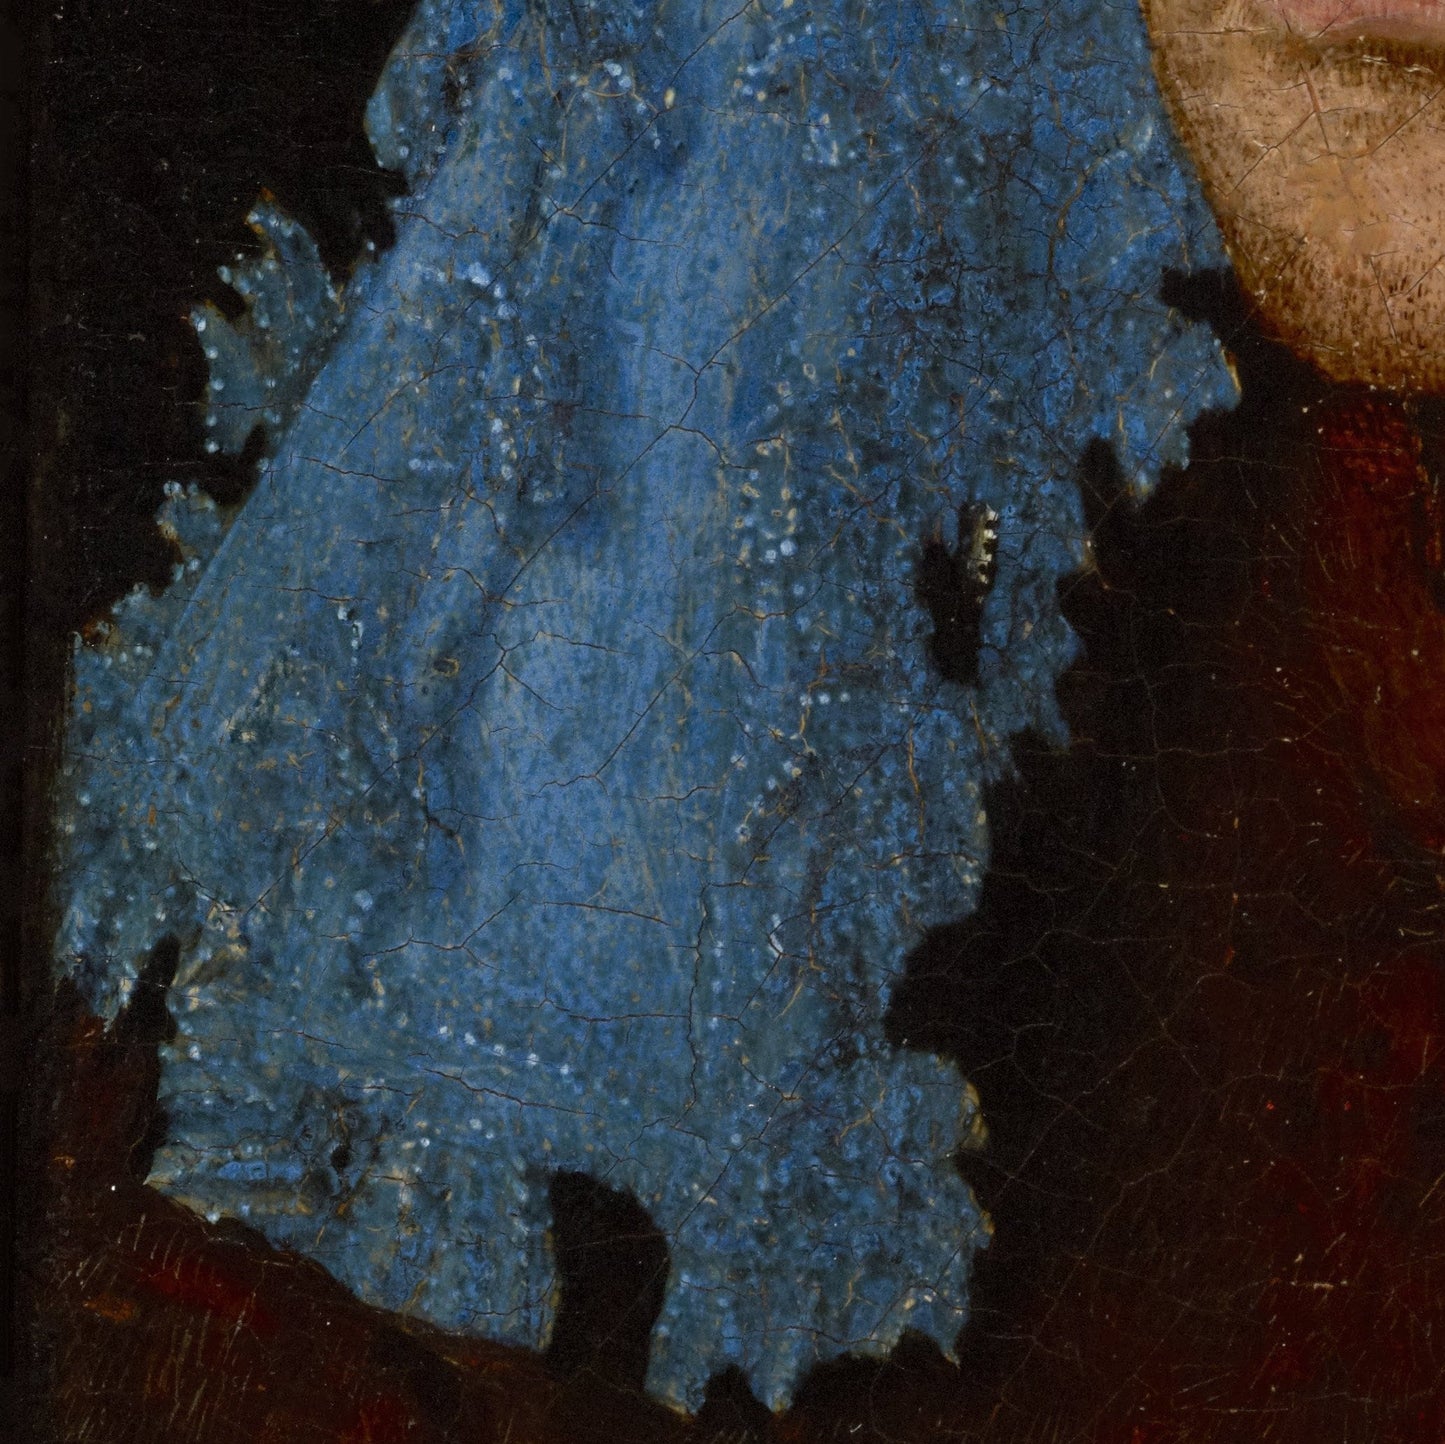 Man in a Blue Cap by Jan Van Eyck, 3d Printed with texture and brush strokes looks like original oil-painting, code:333